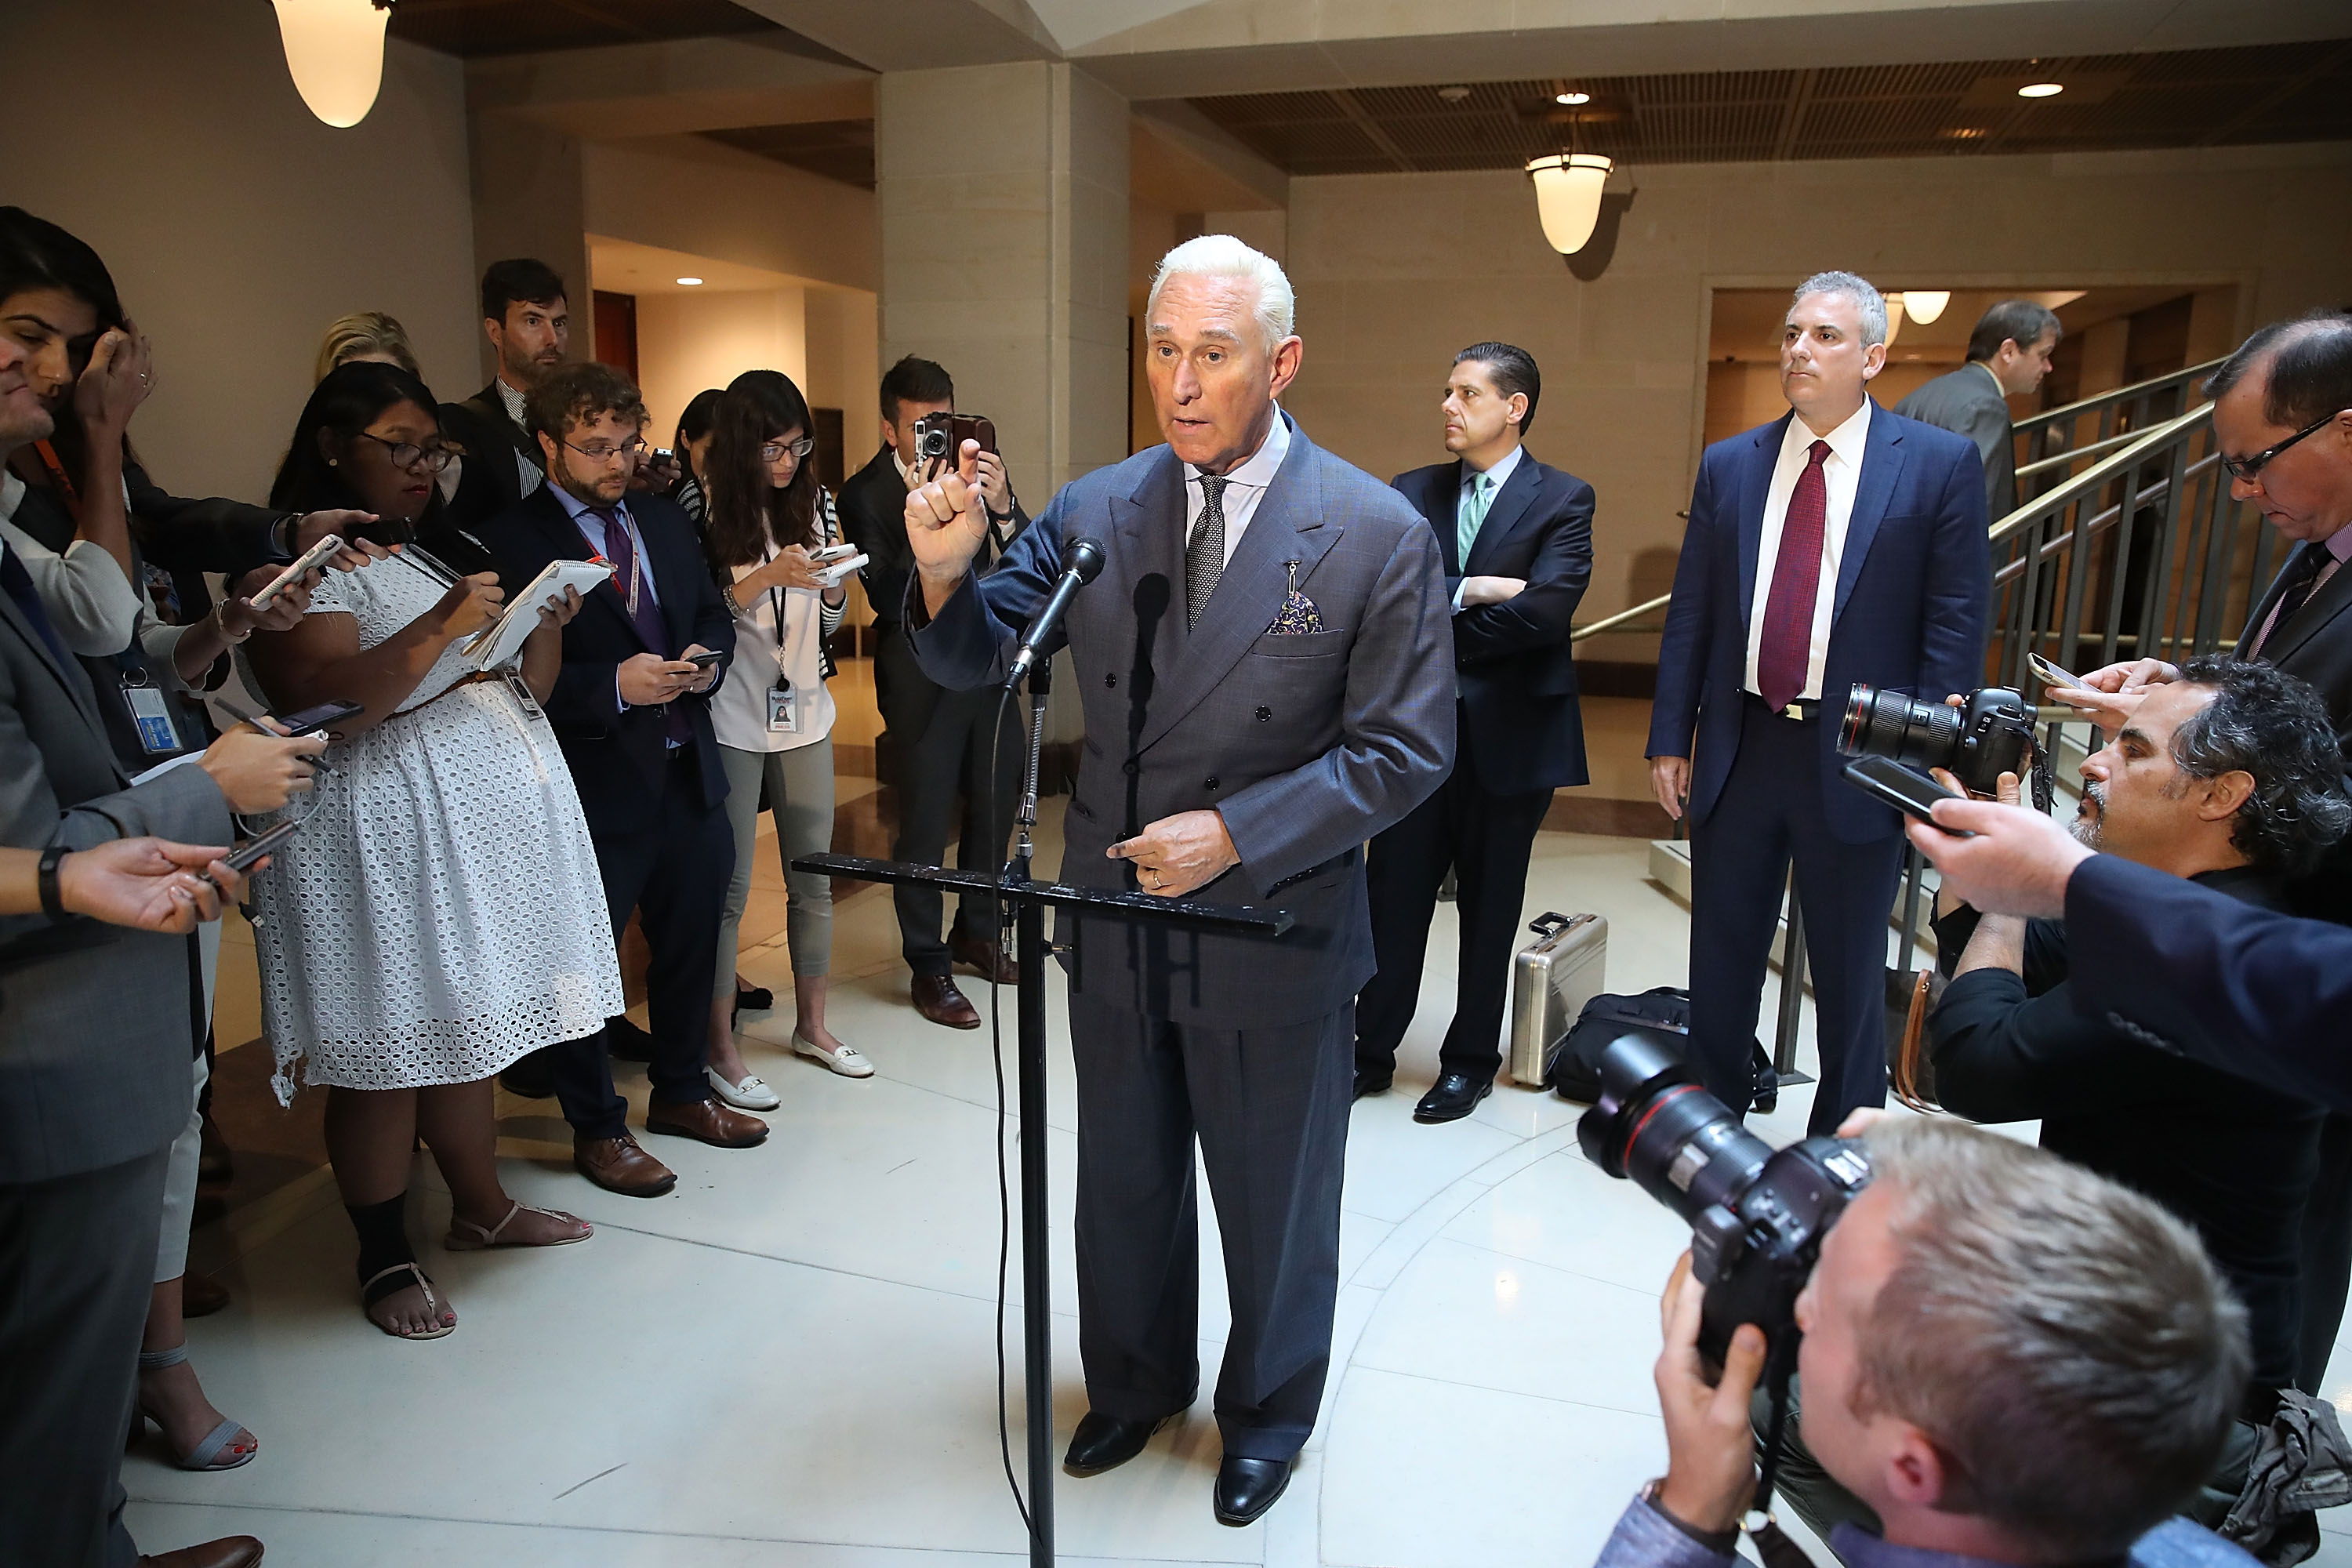 Trump Confidant Roger Stone Testifies Before House Intelligence Committee